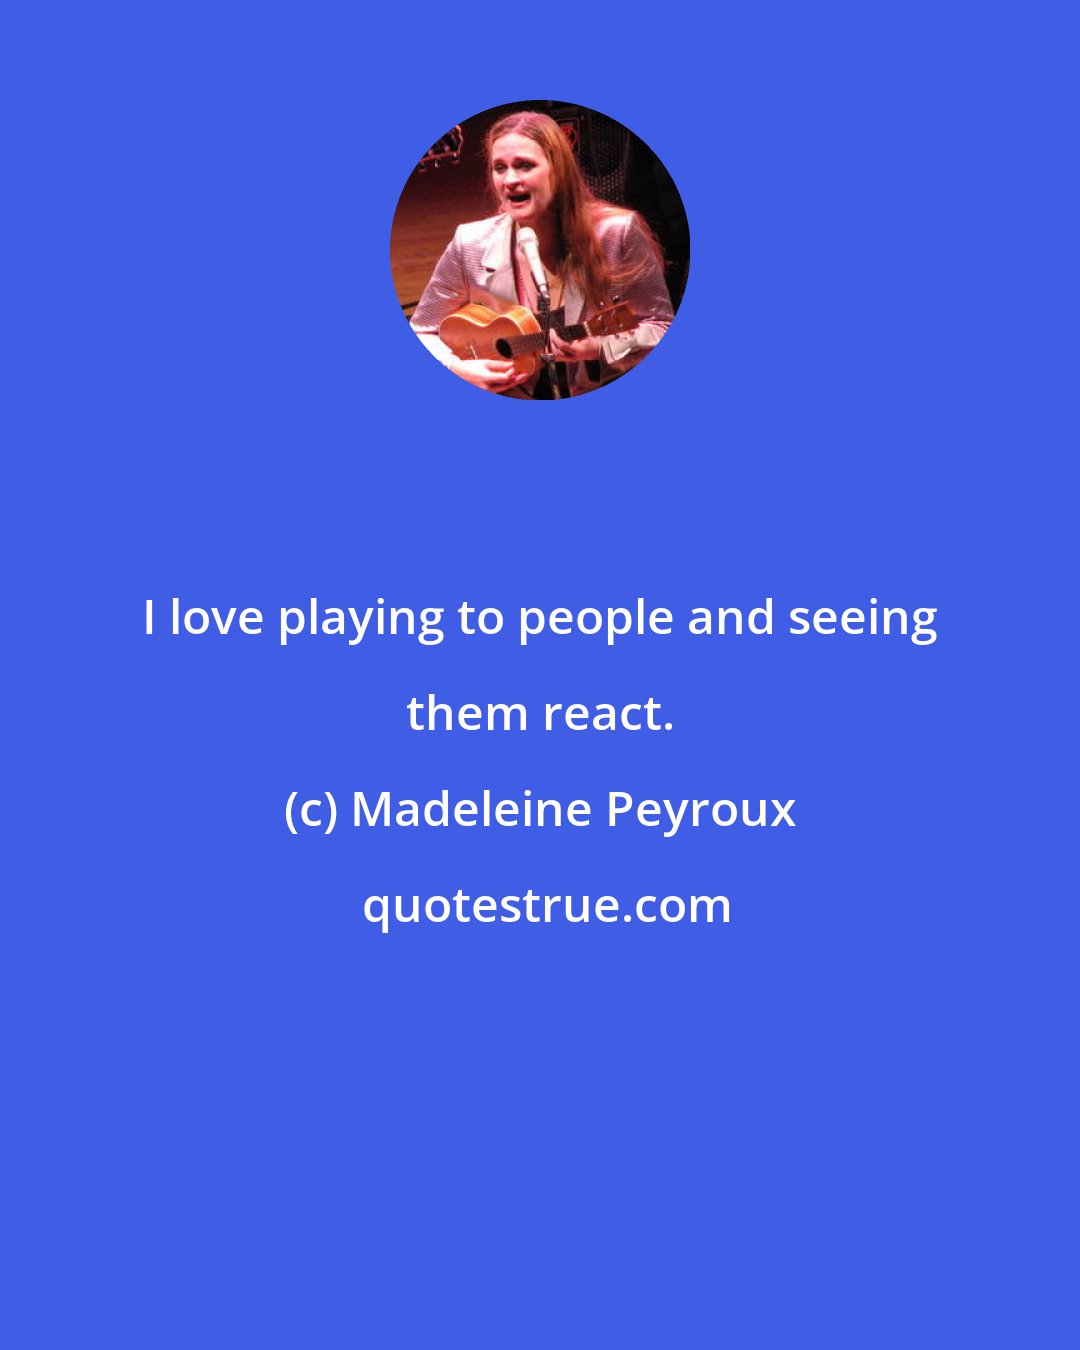 Madeleine Peyroux: I love playing to people and seeing them react.